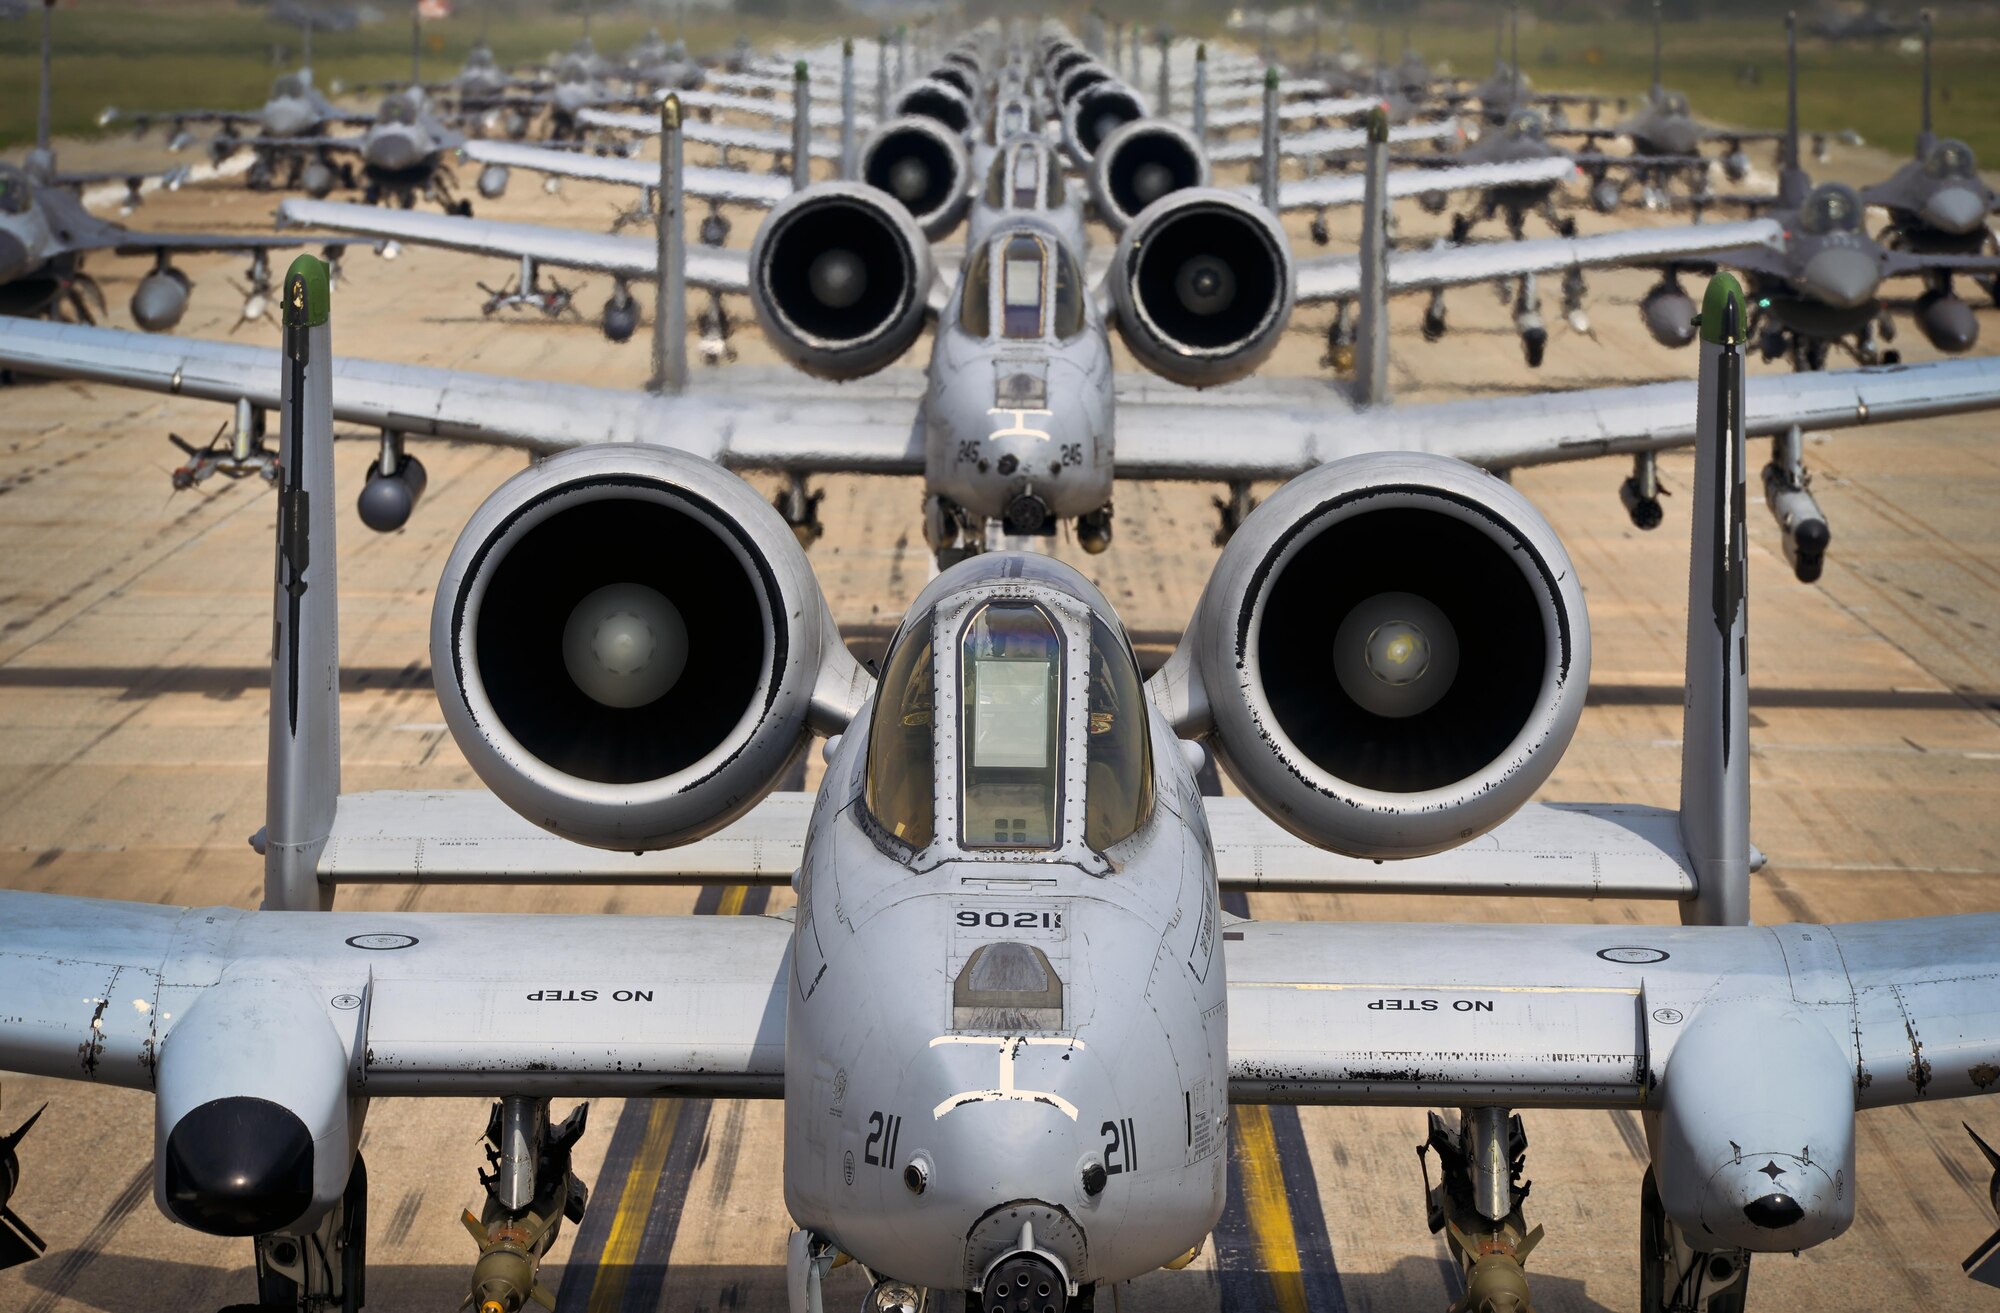 A-10 Thunderbolt II and F-16 Fighting Falcon fighter aircraft perform an 'Elephant Walk' on the runway this week during Exercise Beverly Herd 16-01 at Osan Air Base, Republic of Korea.  The Elephant Walk was a demonstration of U.S. Air Force capabilities and strength and showcases the wing's ability to generate combat airpower in an expedient manner in order to respond to simulated contingency operations. The A-10 Thunderbolt II aircraft are the 25th Fighter Squadron "Draggins" and the F-16 Fighting Falcon aircraft are the 36th Fighter Squadron "Friends" from the 51st Fighter Wing, Osan AB, ROK; the additional F-16 aircraft are the 179th Fighter Squadron "Bulldogs" from the 148th Fighter Wing out of Duluth Air National Guard Base, Minnesota. (U.S. Air Force photo by Tech. Sgt. Travis Edwards/Released) 